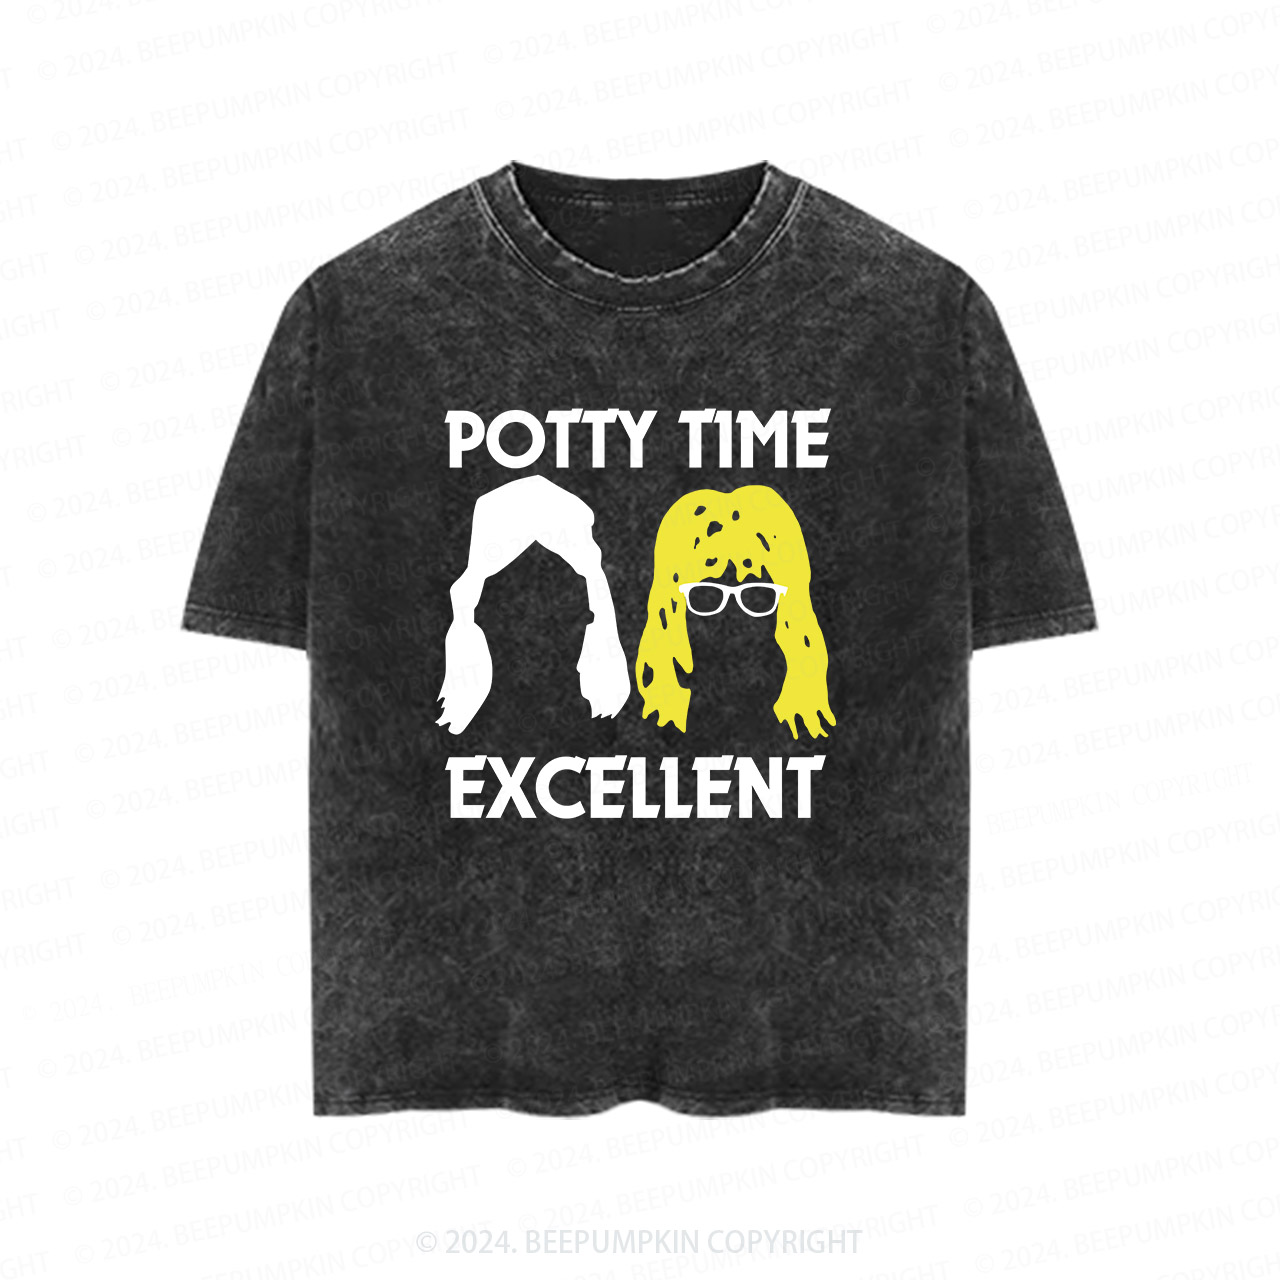 Potty Time Excellent Funny Toddler&Kids Washed Tees